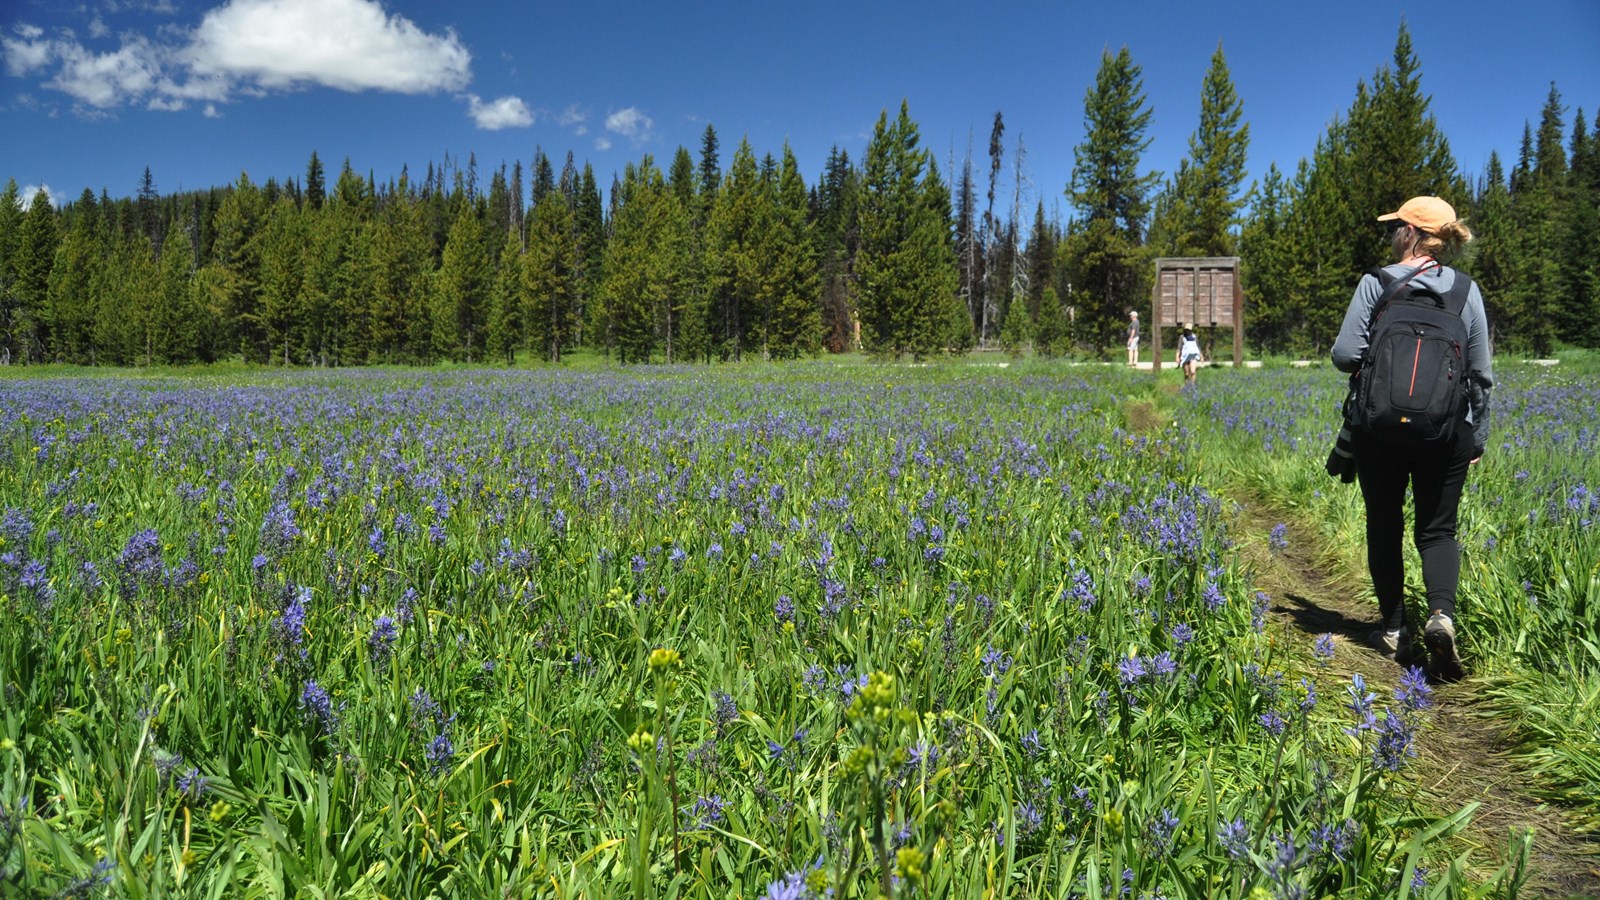 Open meadow full of plants with blue flowers on the tops of tall, green stems. Evergreen trees in th